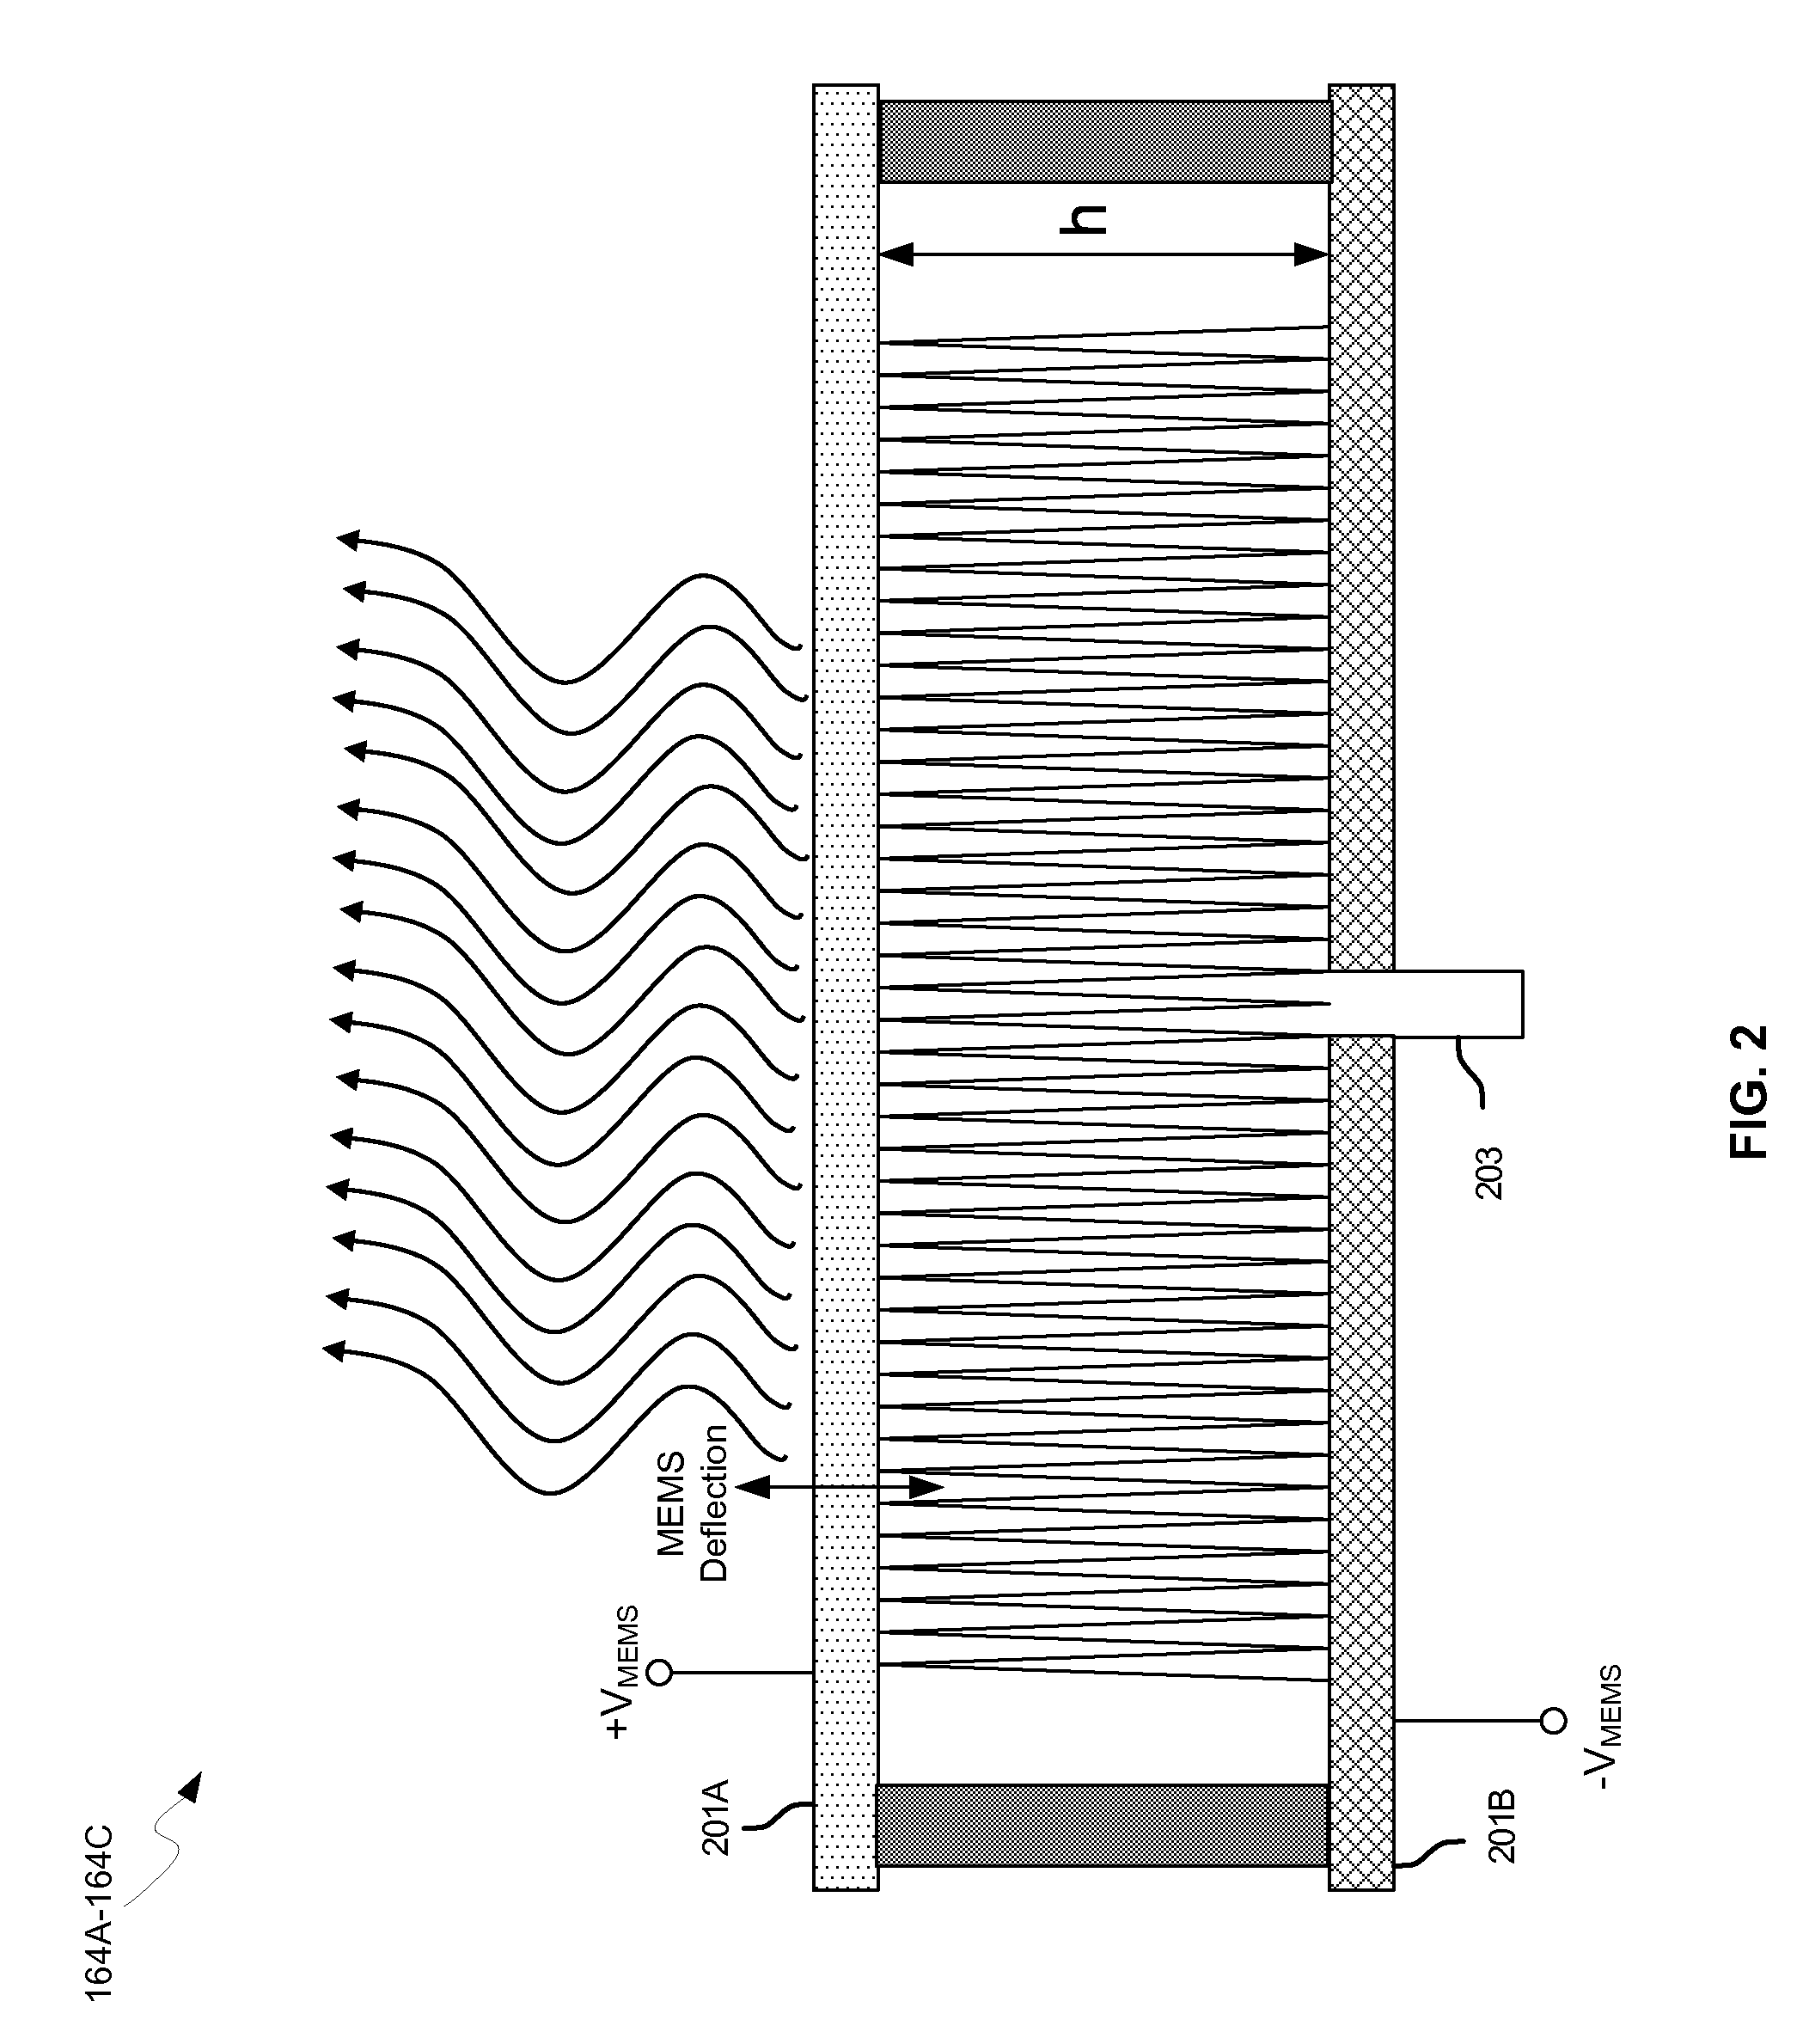 Method and system for wireless communication utilizing leaky wave antennas on a printed circuit board